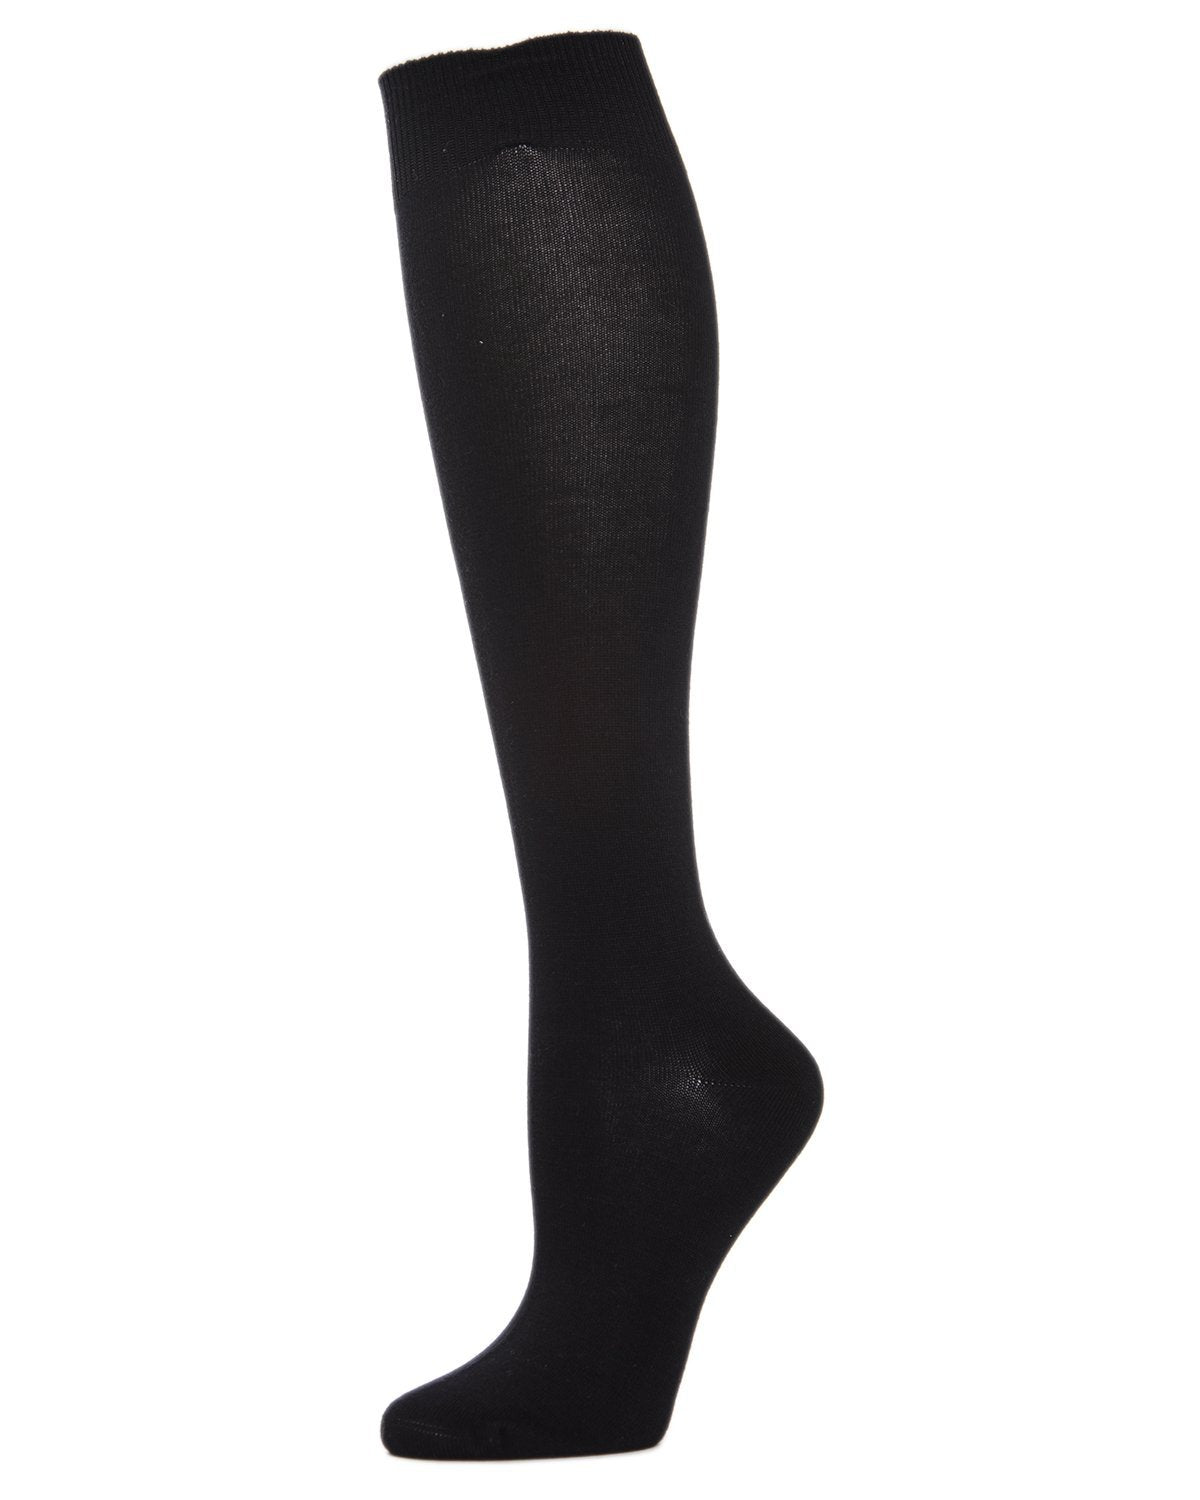 Solid Bamboo Knee-High